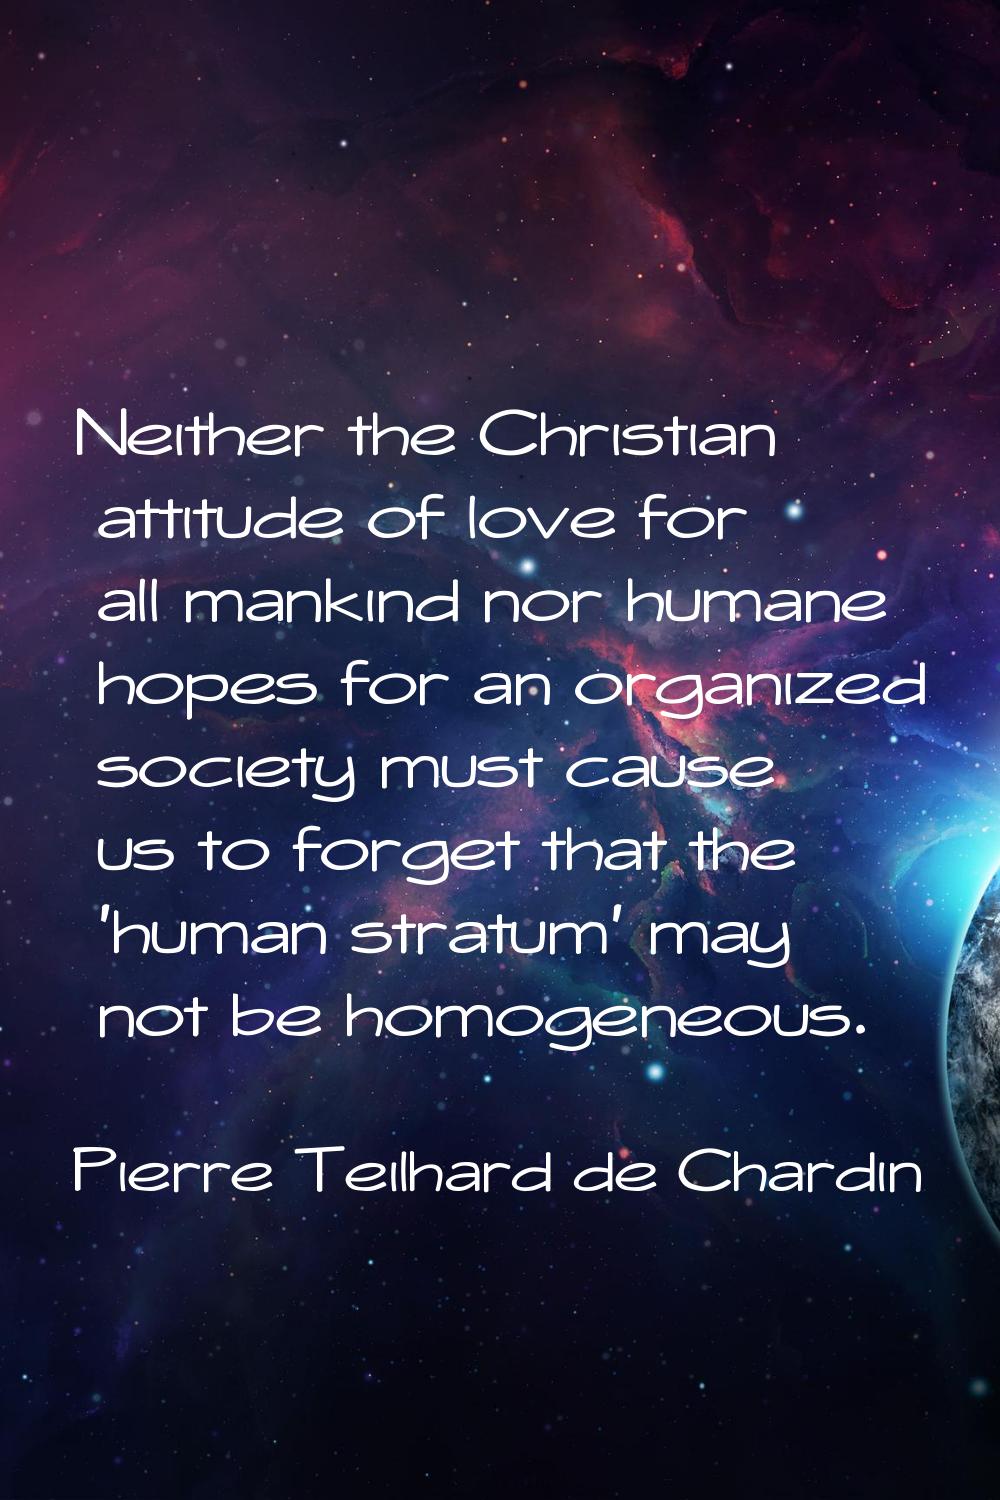 Neither the Christian attitude of love for all mankind nor humane hopes for an organized society mu